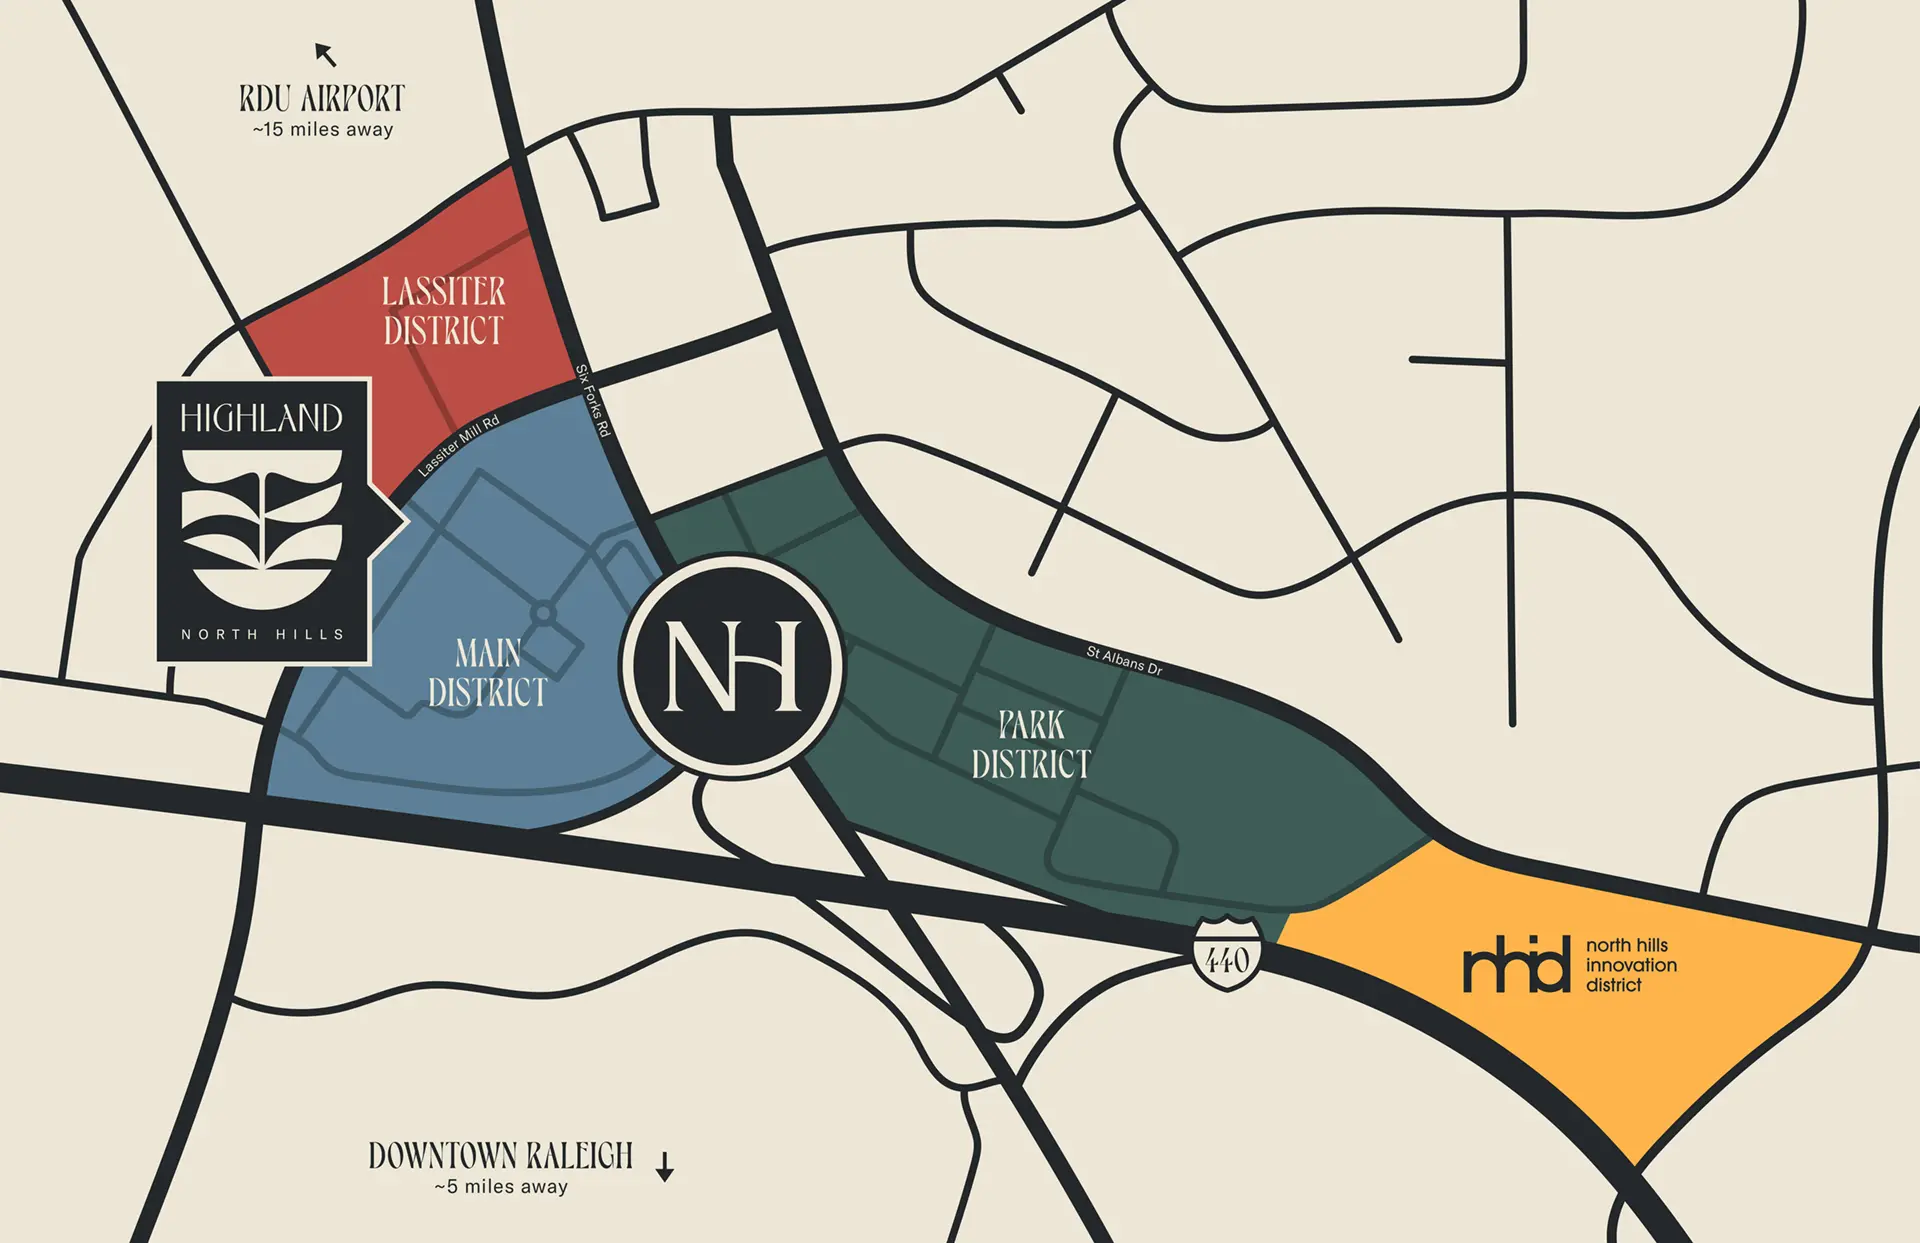 map of North Hills in Raleigh, NC, showing Highland in Main District with nearby Lassiter District, Park District, and North Hills Innovation District.